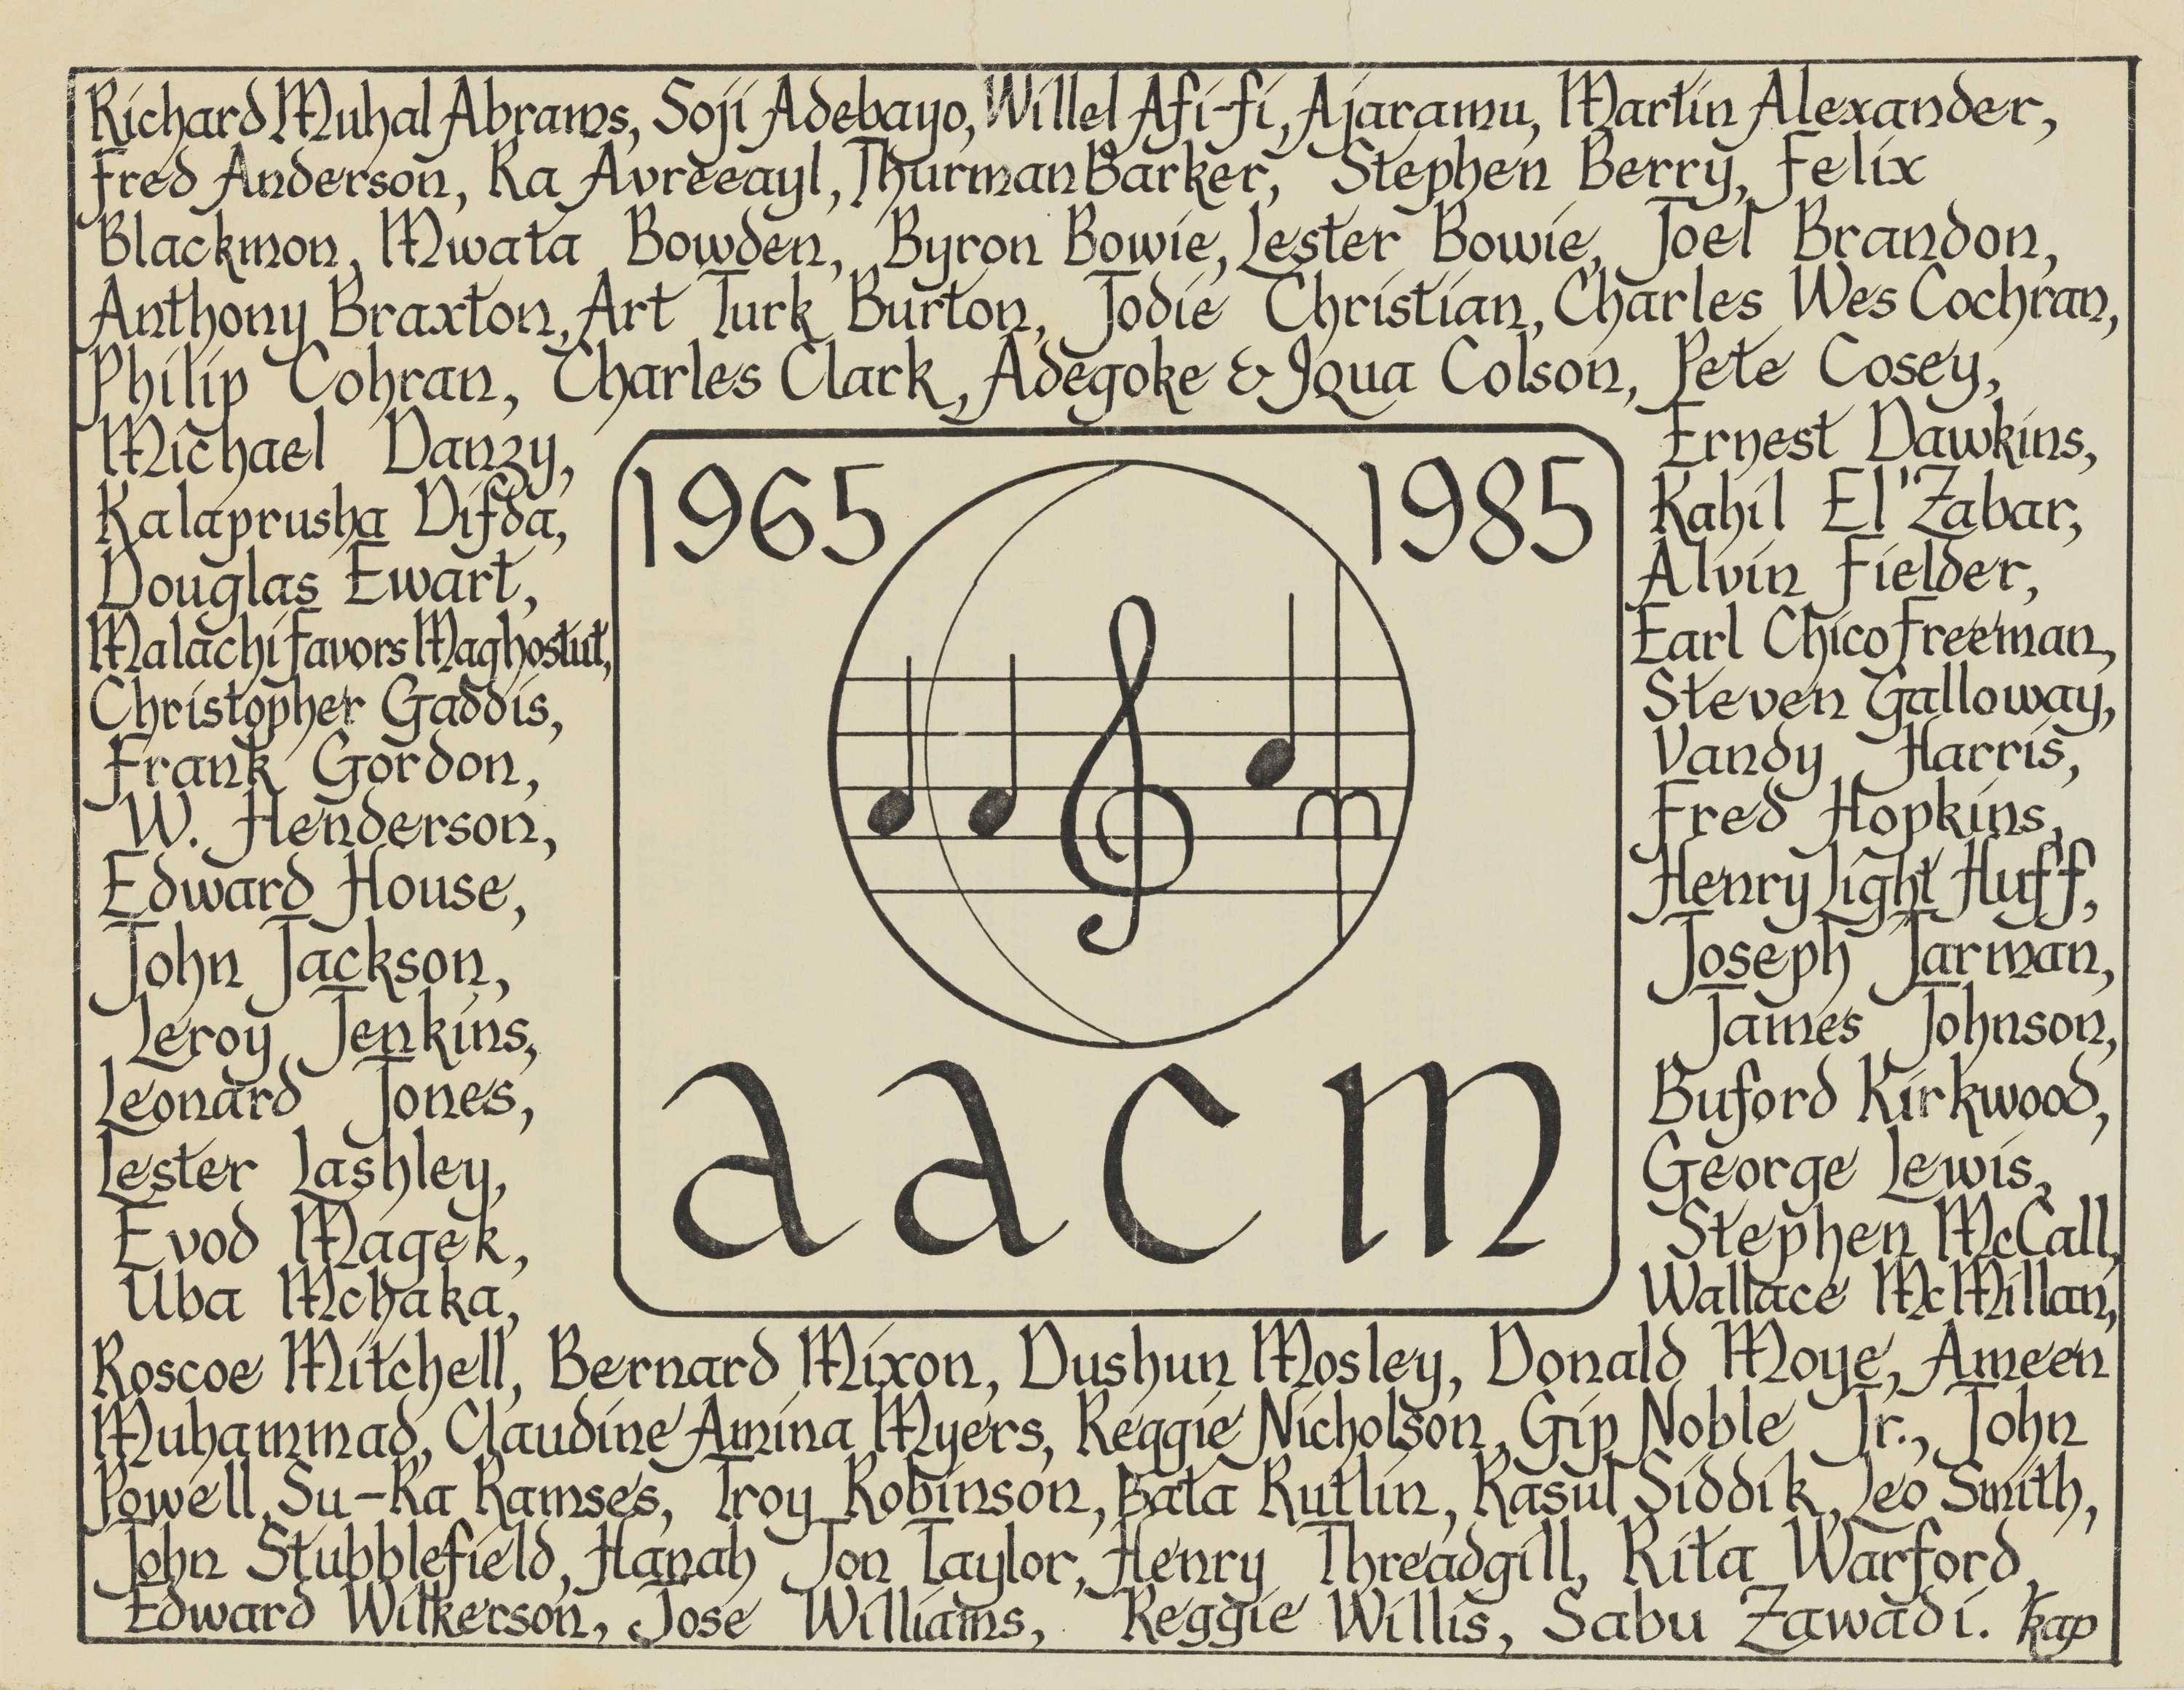 In a landscape view, each name is handwritten. At the center of the page, music notes and title 'aacm' is outlined separately.